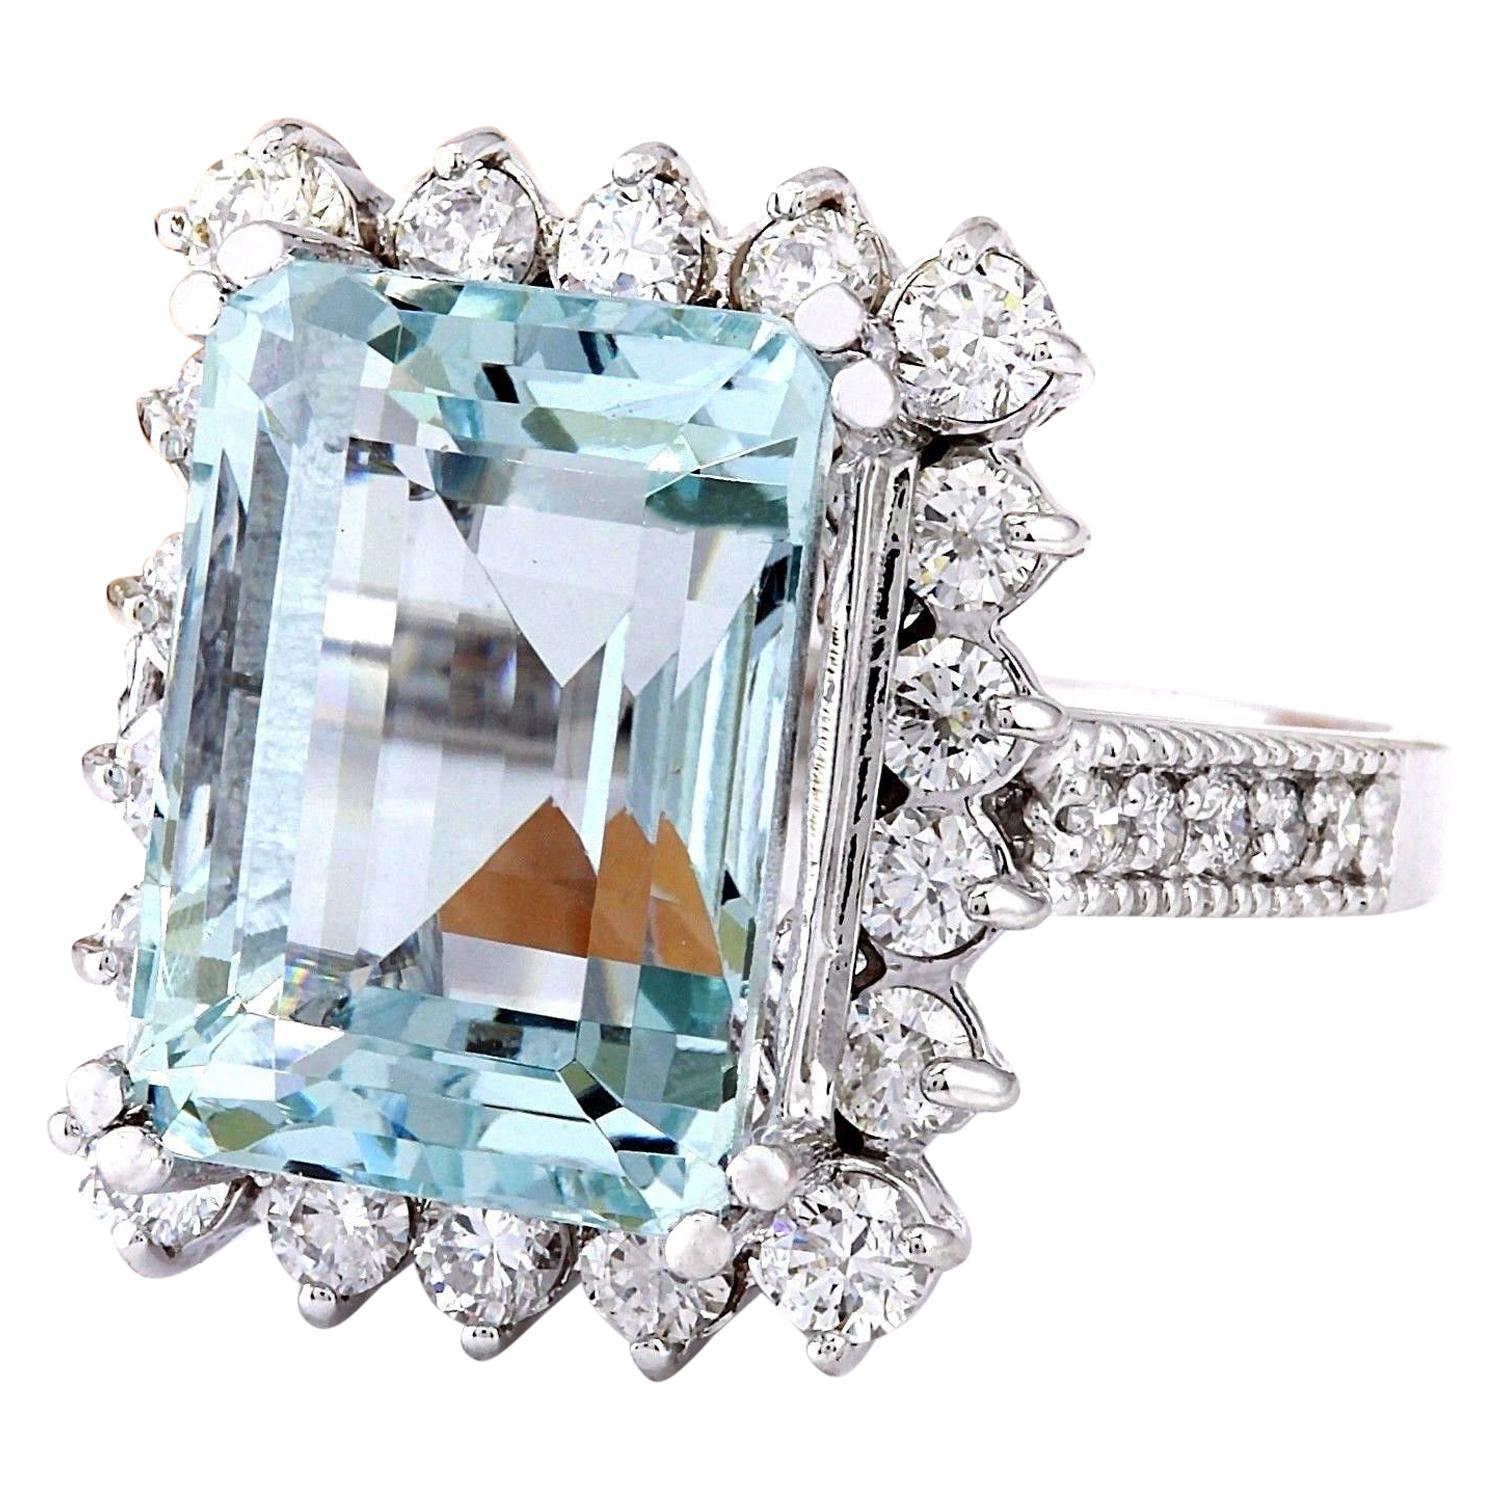 Embrace the ethereal beauty of this stunning Aquamarine Diamond Cocktail Ring, a magnificent statement piece crafted in solid 14K White Gold. Weighing a remarkable 10.73 carats in total, this ring exudes opulence and sophistication.

At its center,